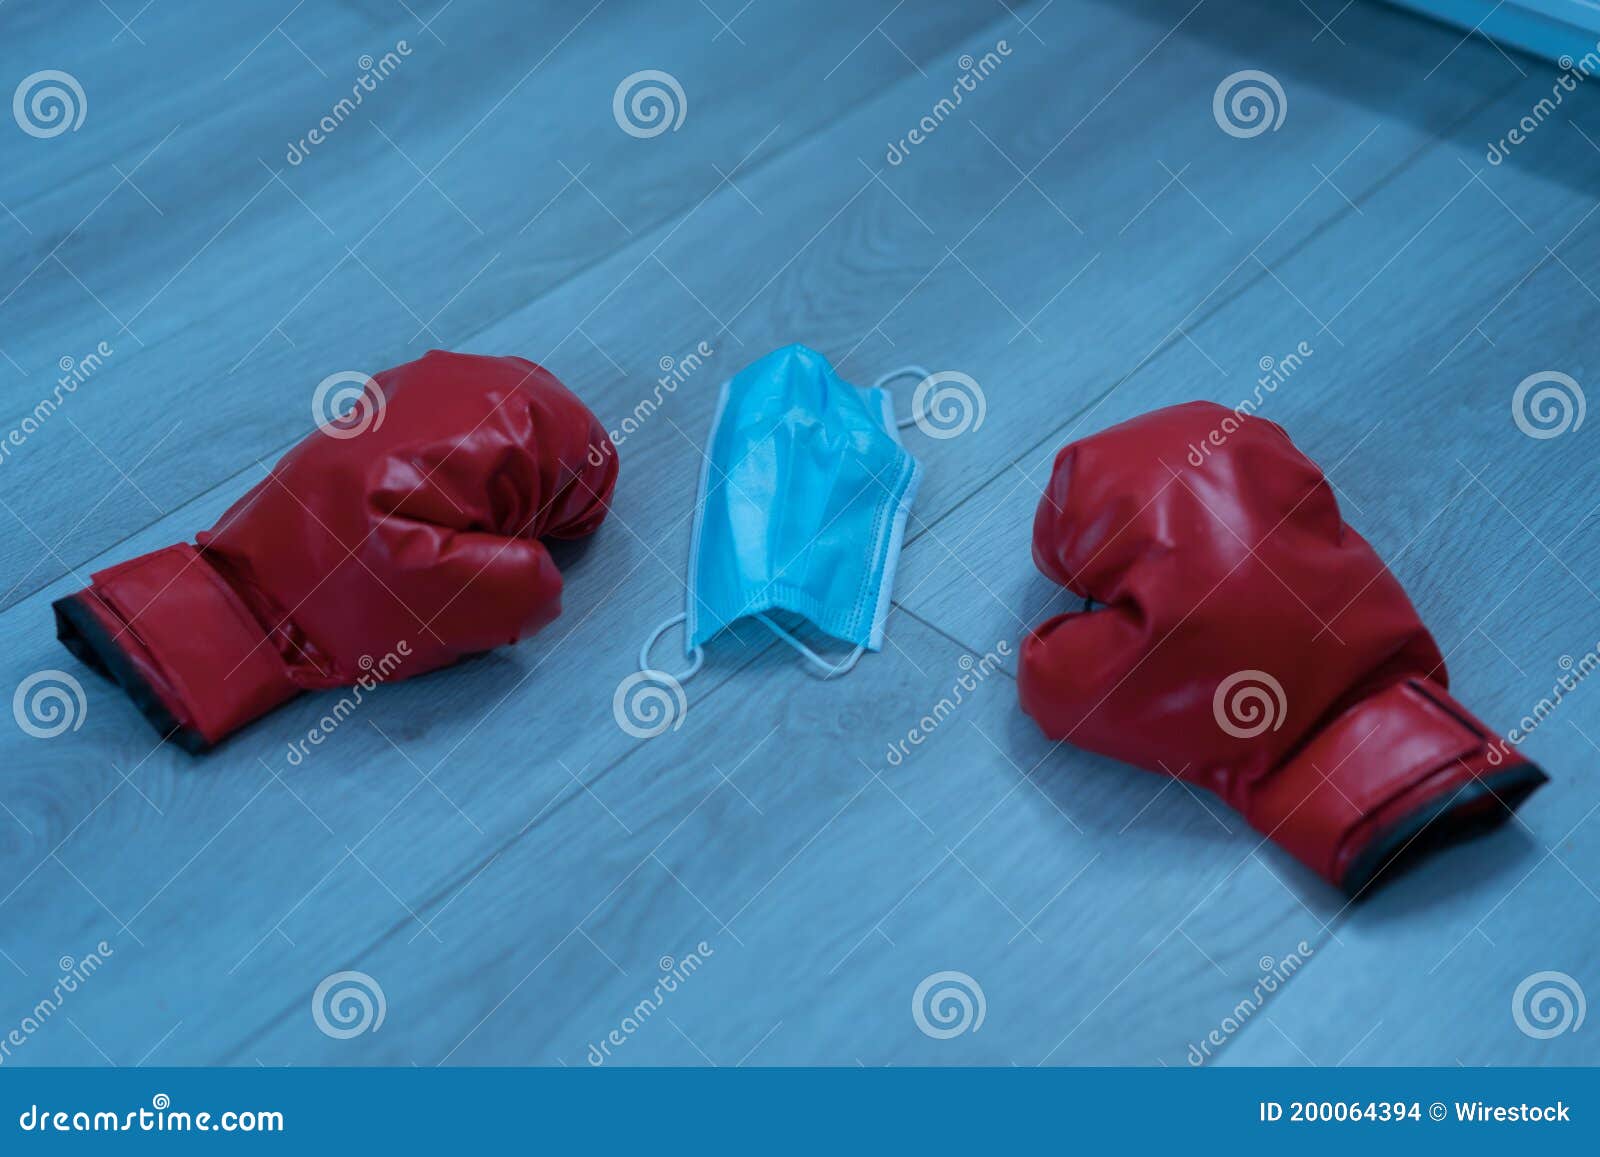 red leather boxing gloves and a medical mask on a wooden background - pandemic sports concept